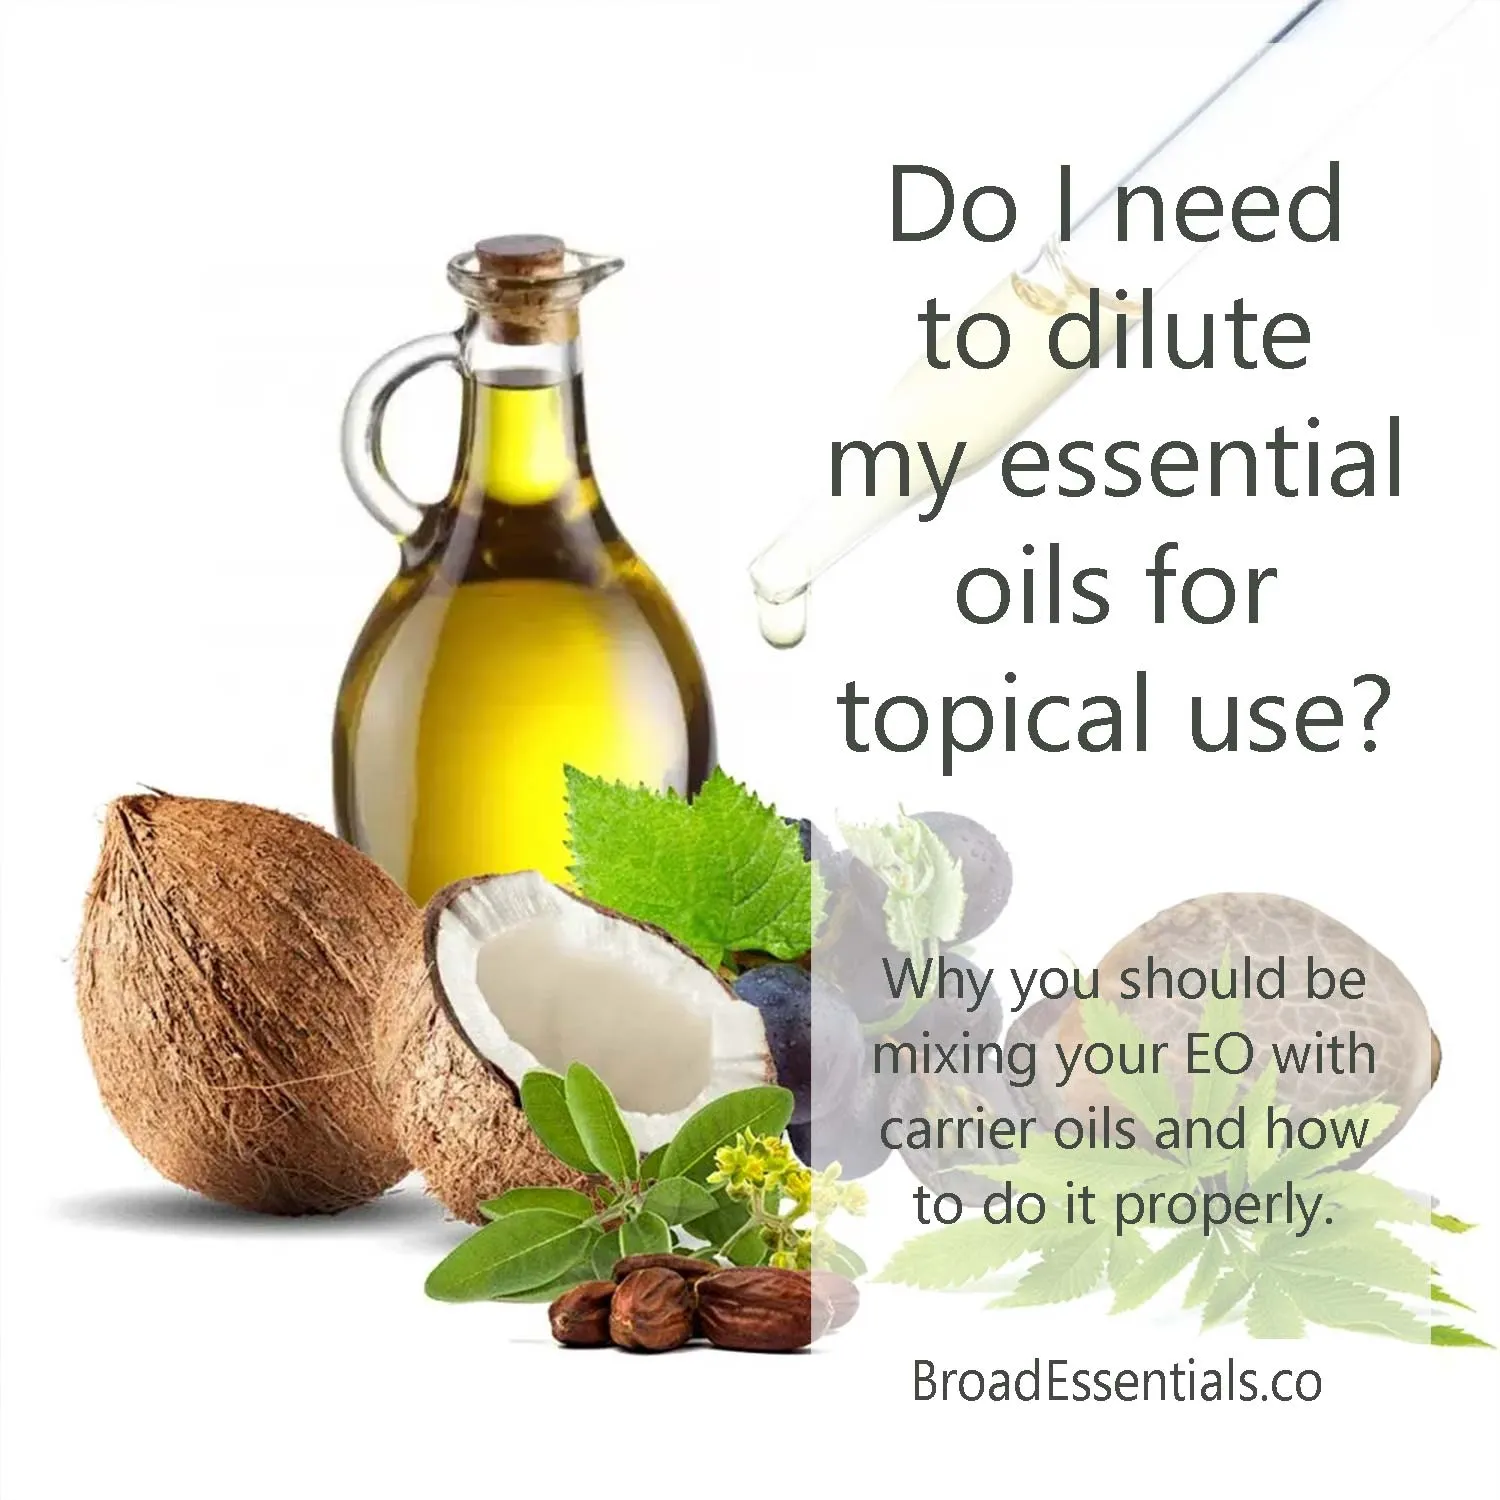 Do I rellay need to dilute my essential oils in carrier oils and why?